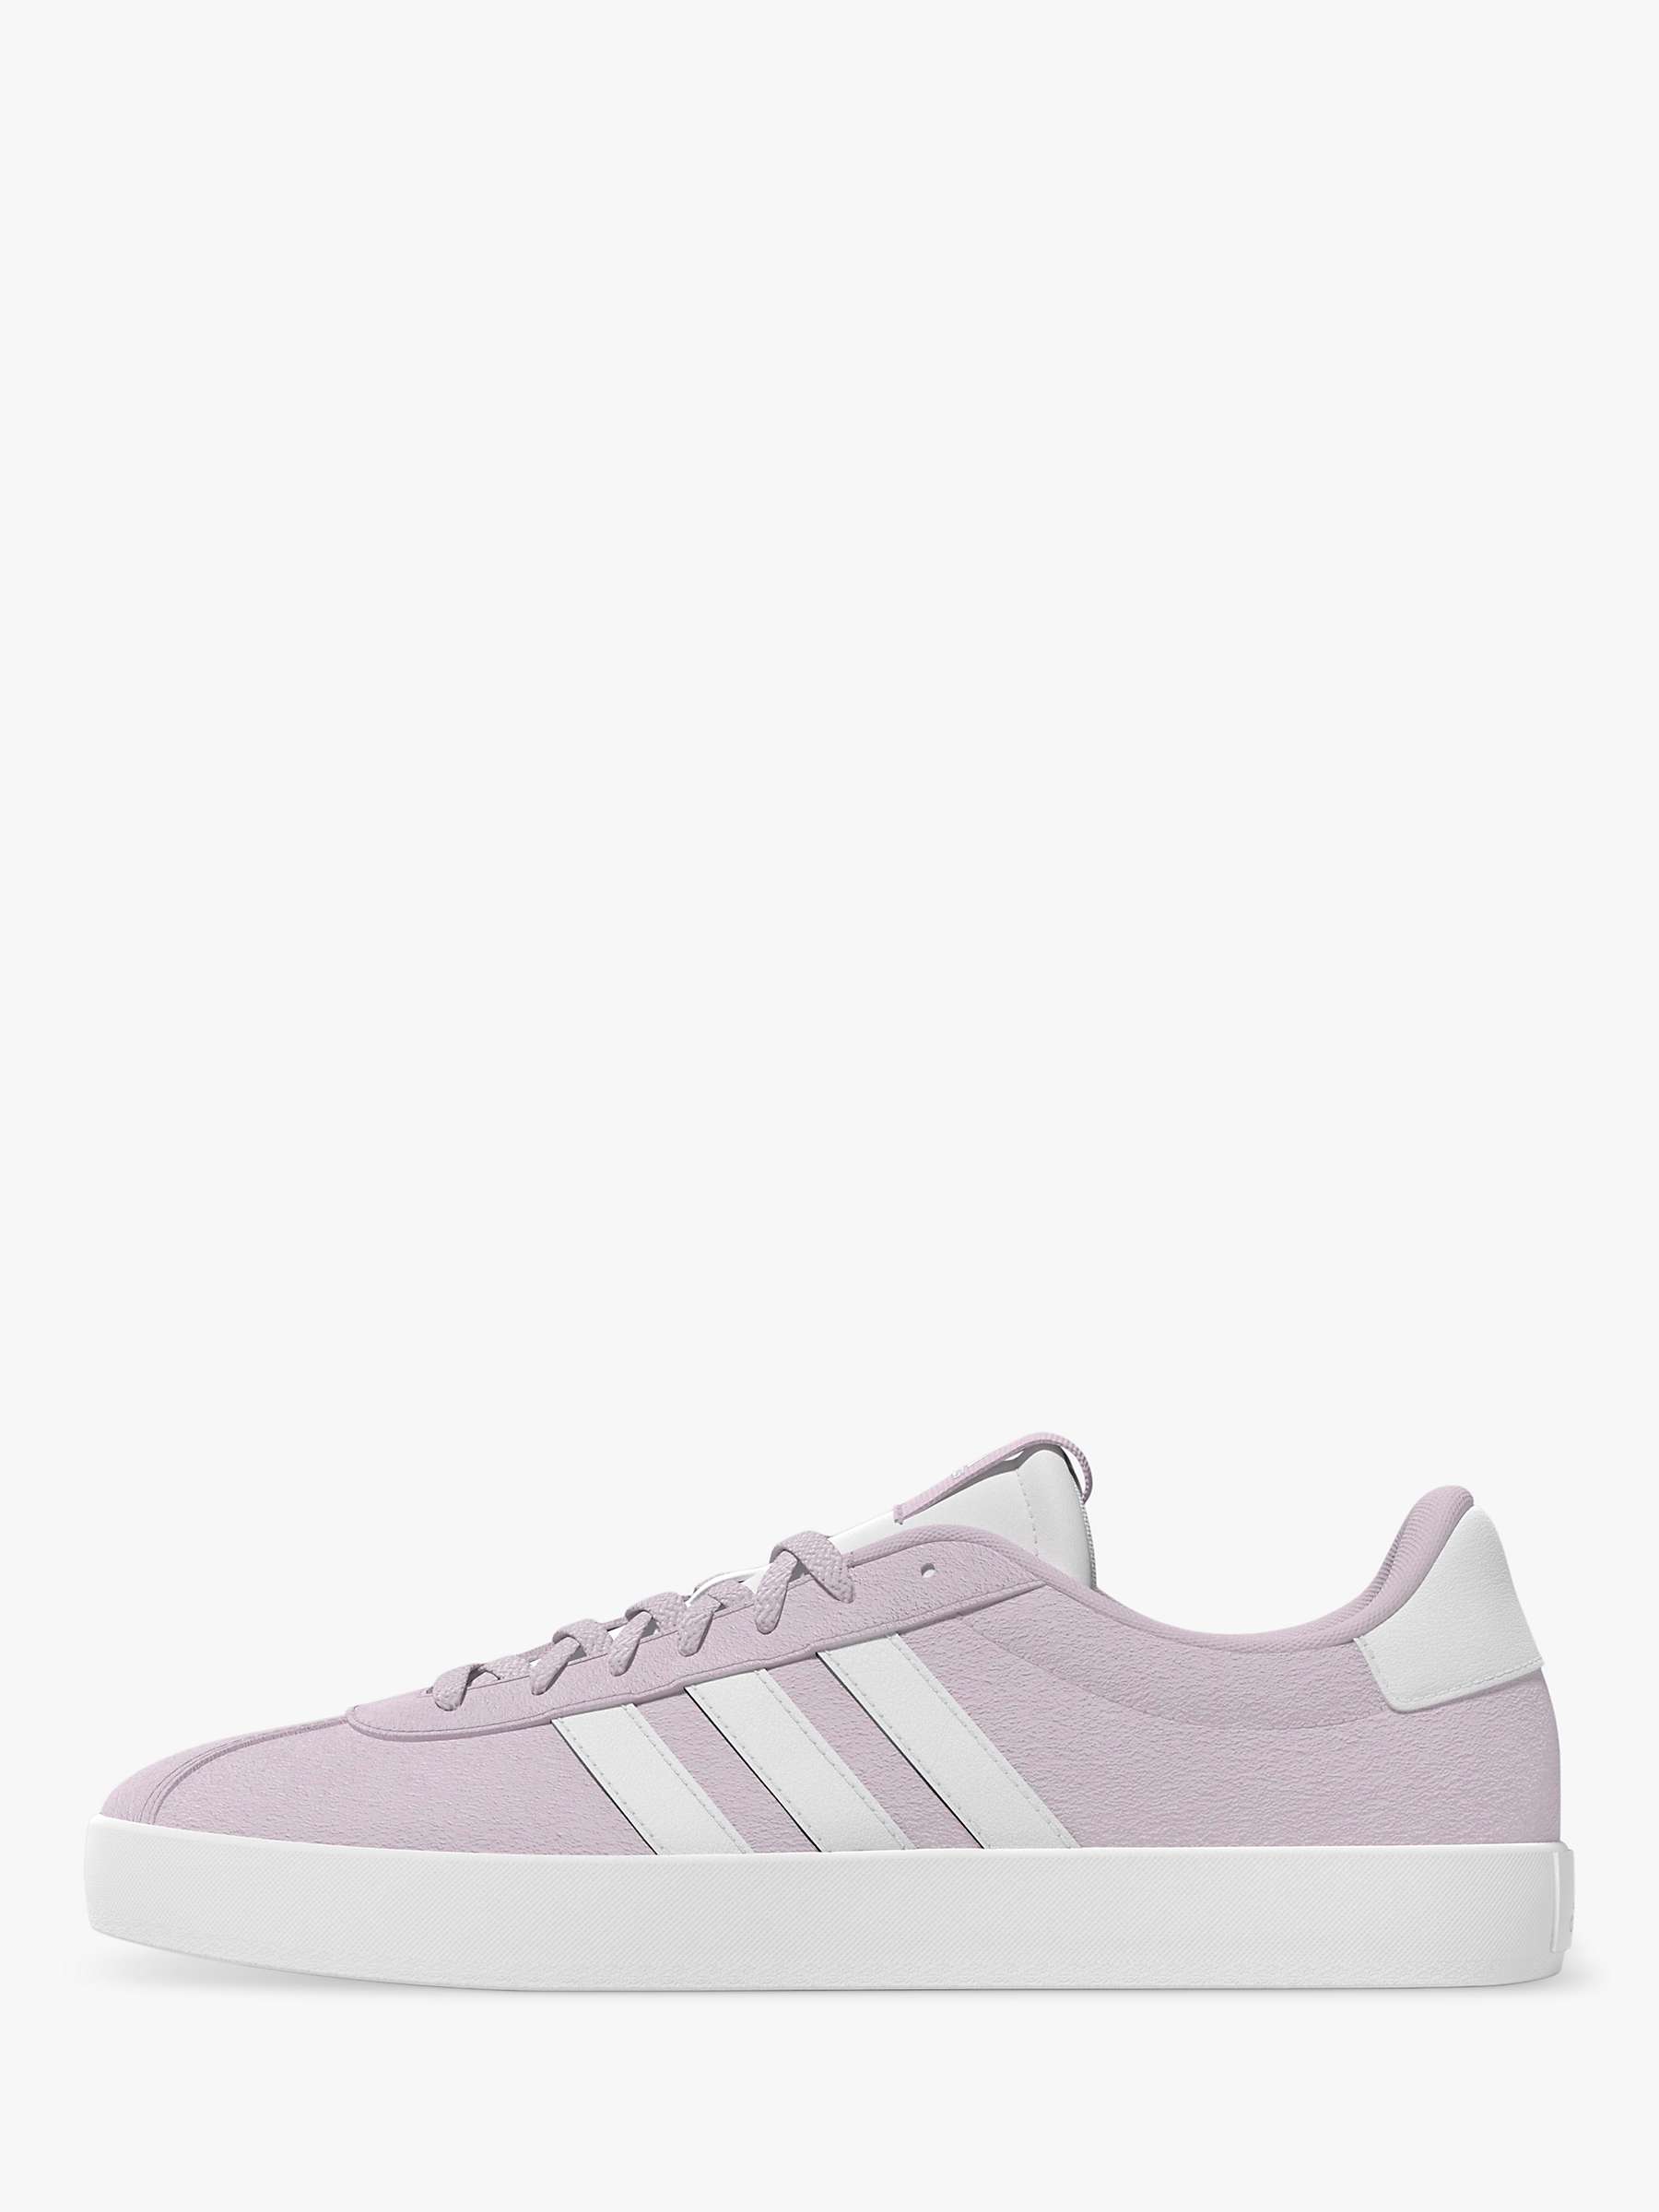 Buy adidas VL Court Suede Trainers, Pink/White Online at johnlewis.com